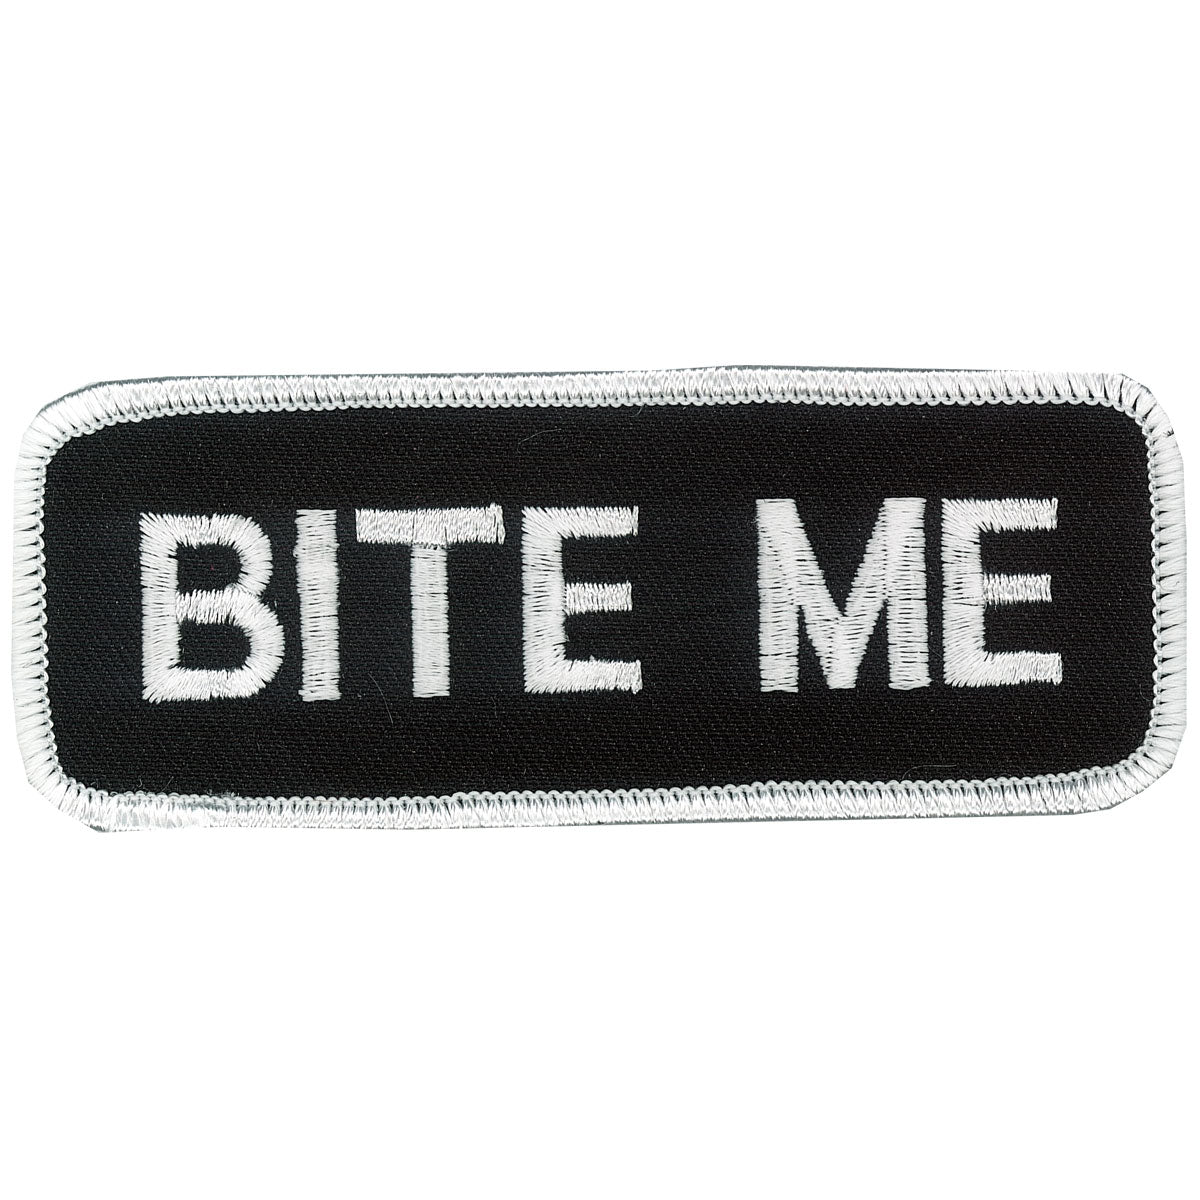 Hot Leathers PPL9088 Bite Me 4" x 2" Patch